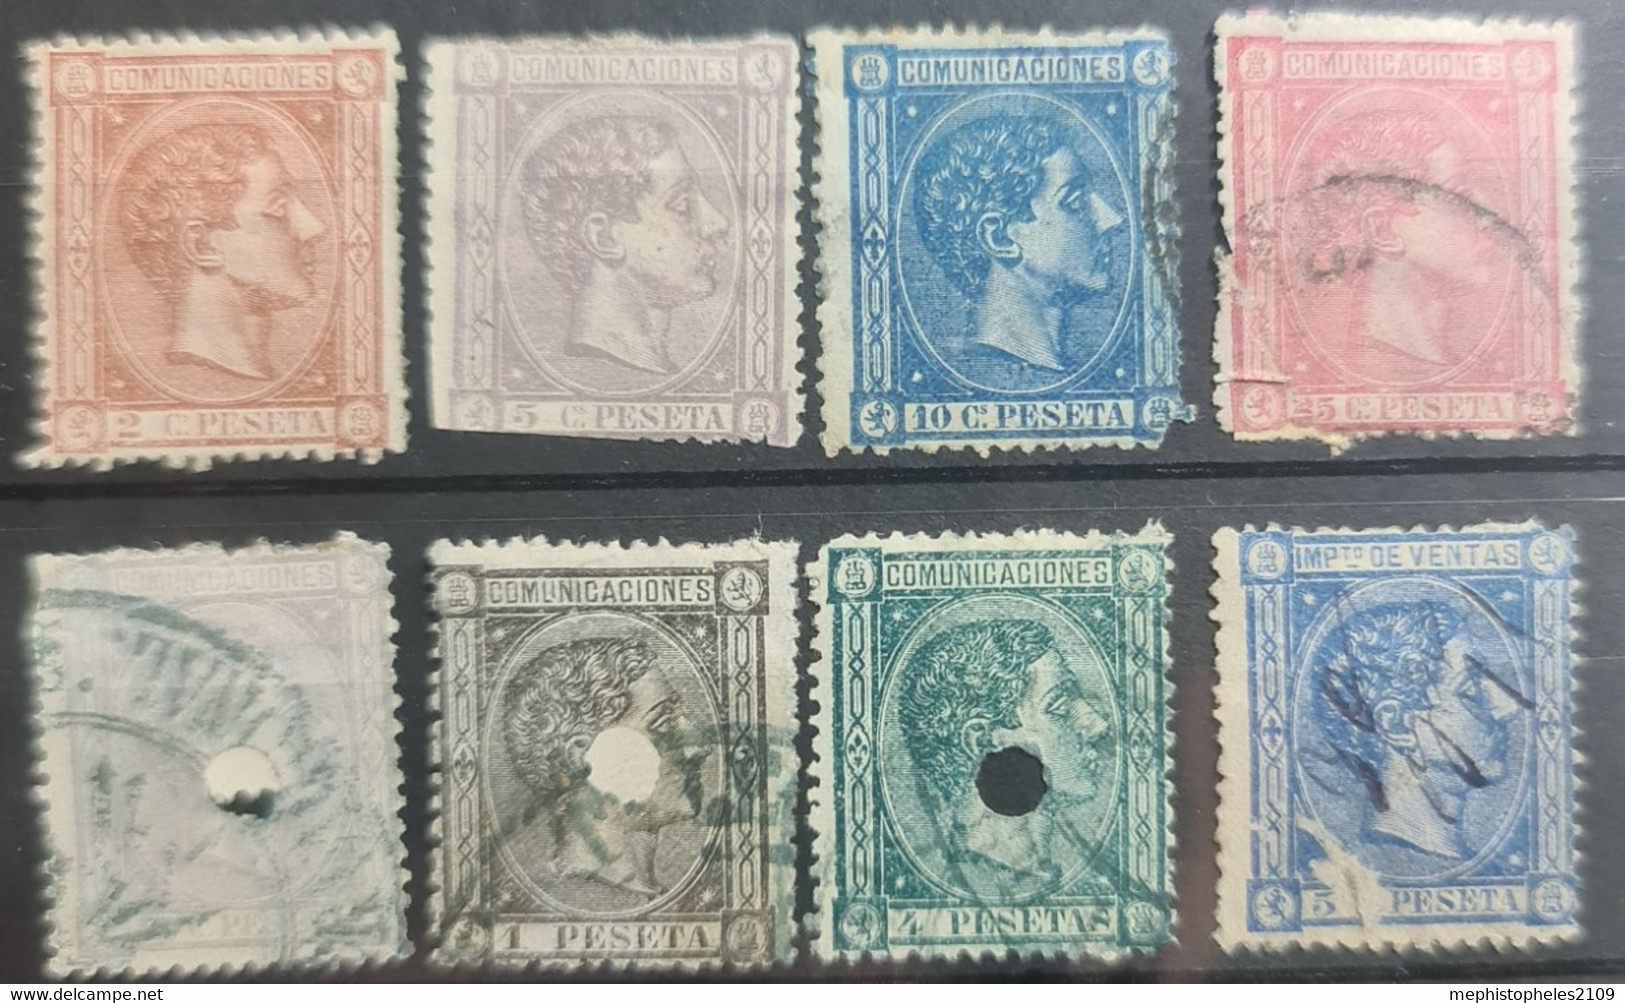 SPAIN 1875 - MLH/canceled - Sc# 212, 213, 214, 216, 218, 219, 220 + 1 Fiscal Value - Used Stamps